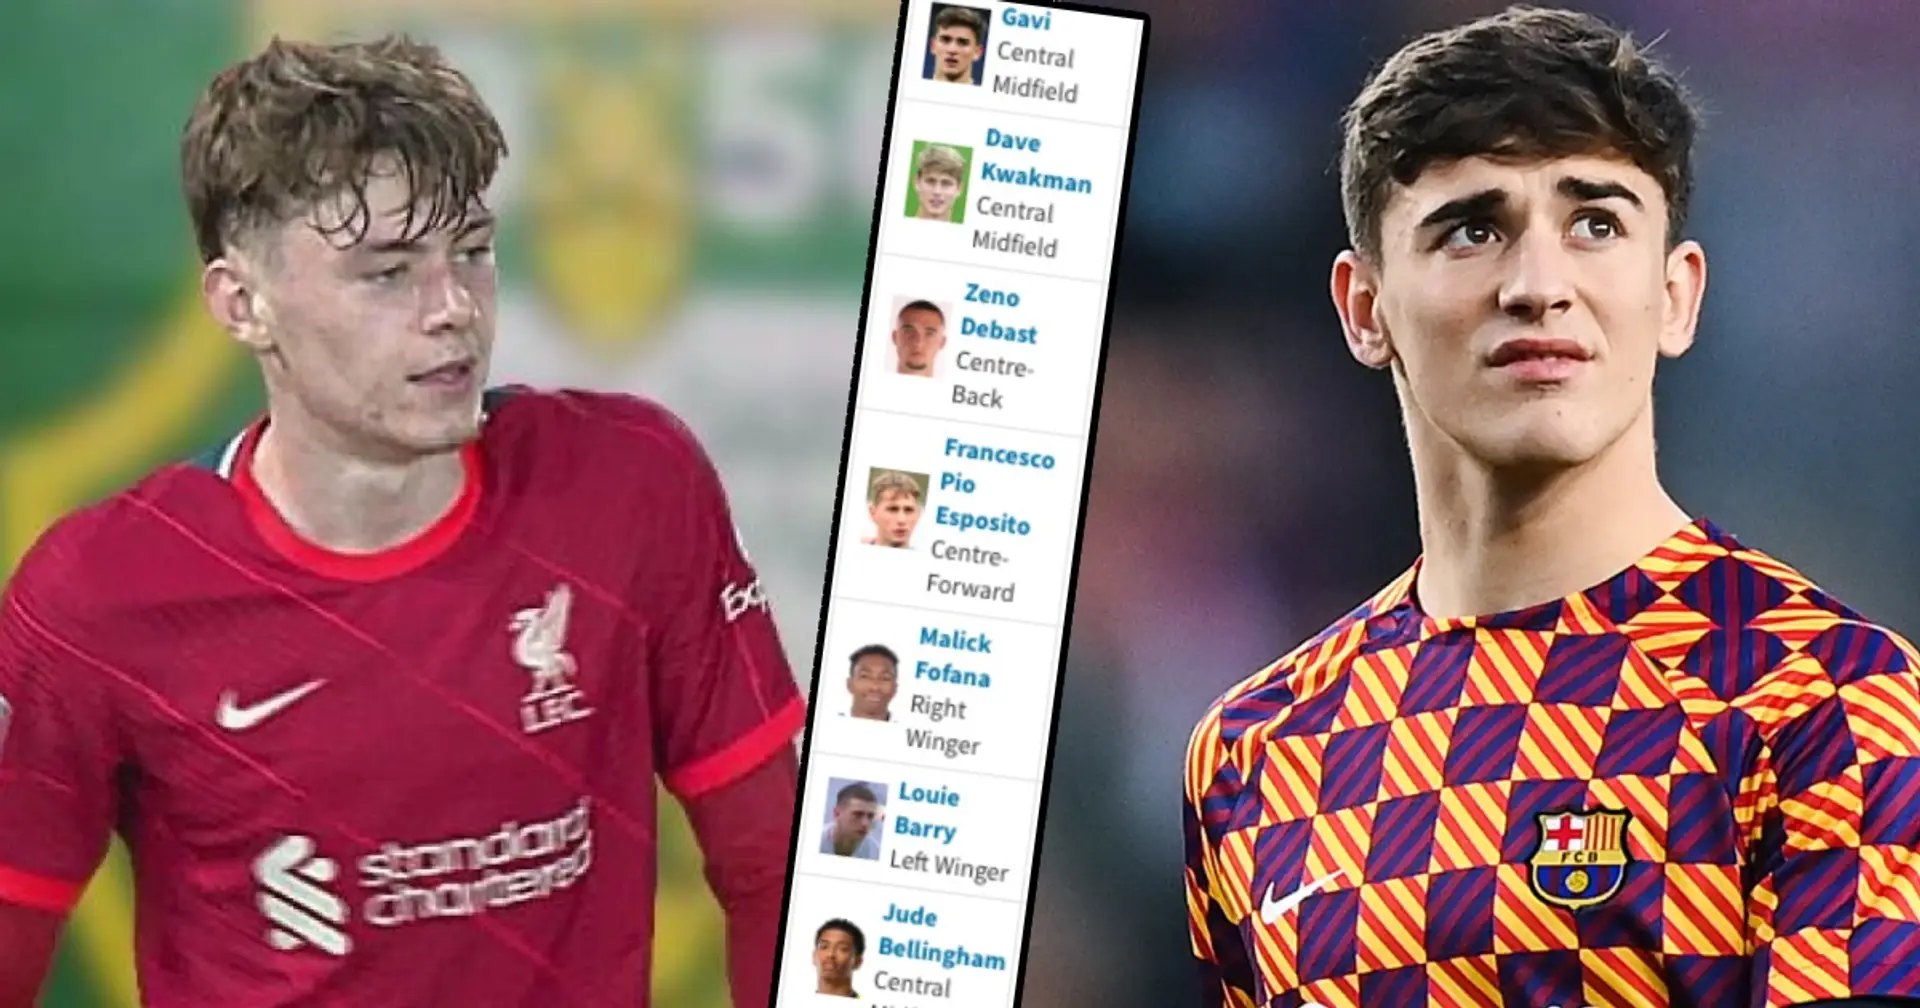 Teenagers with most minutes in the world revealed - Liverpool youngster tops Gavi, Bellingham, others